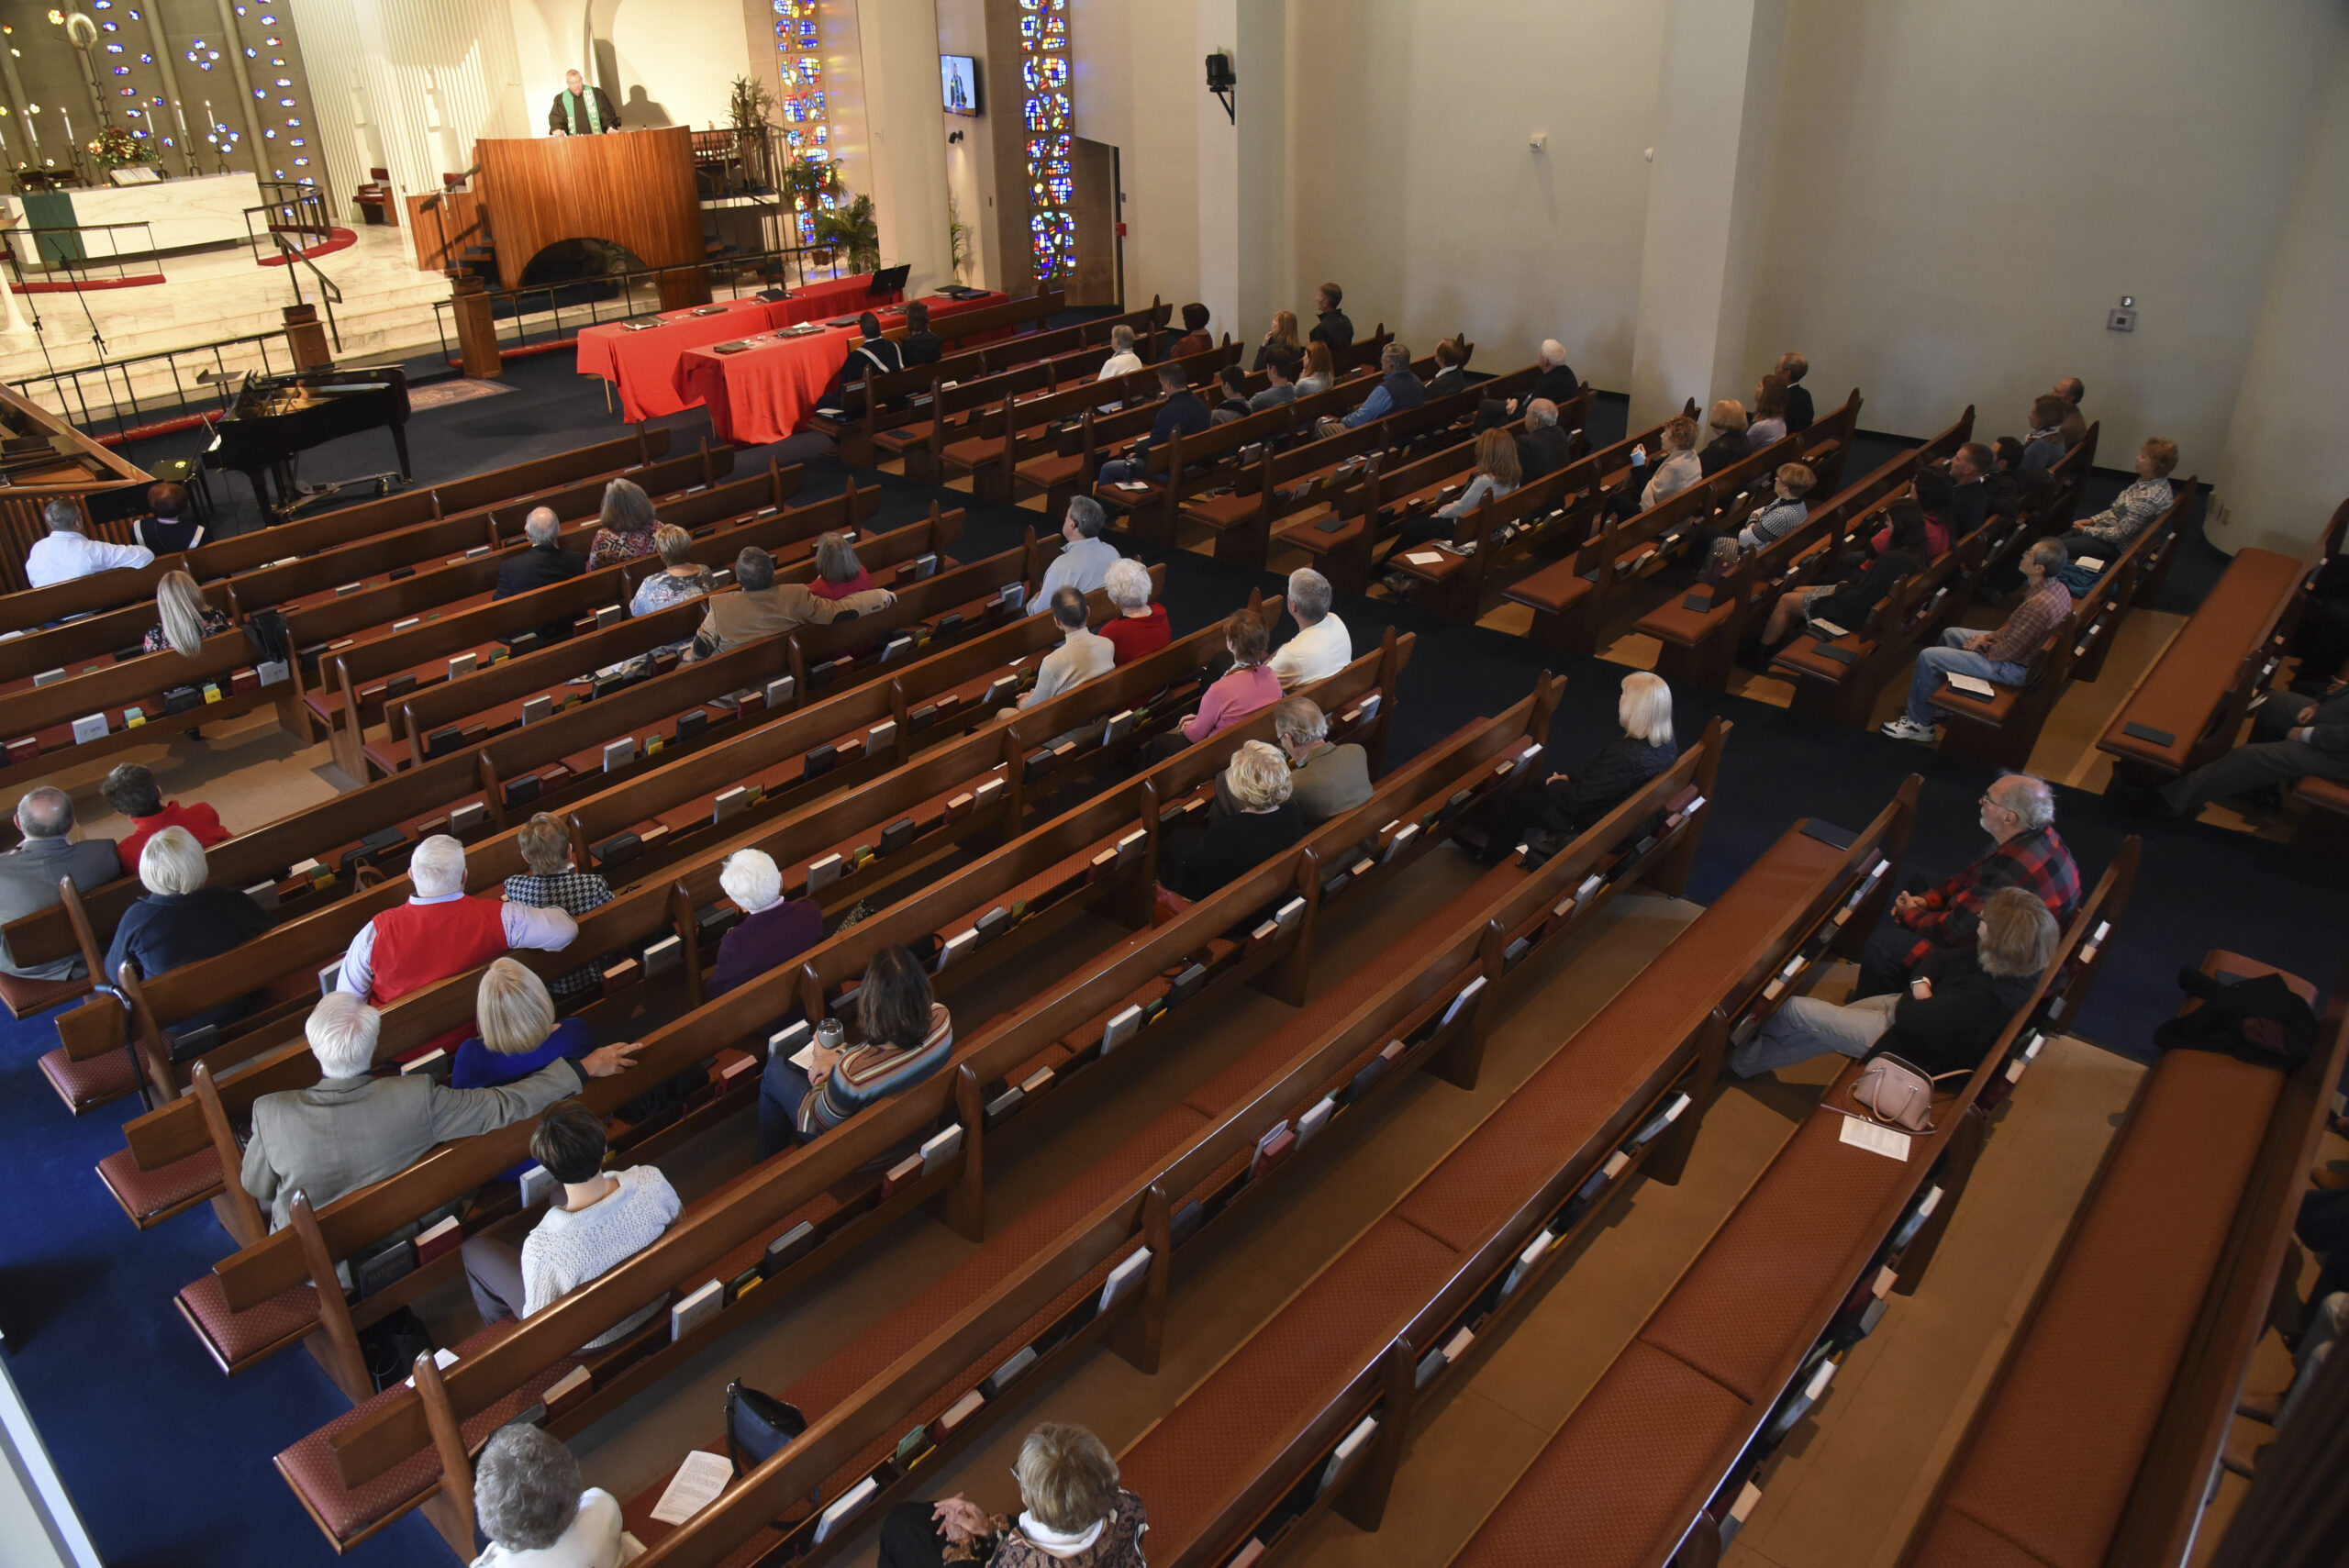 People sit in church pews and listen to Rev. Chris Morgan speak at the front of the church.